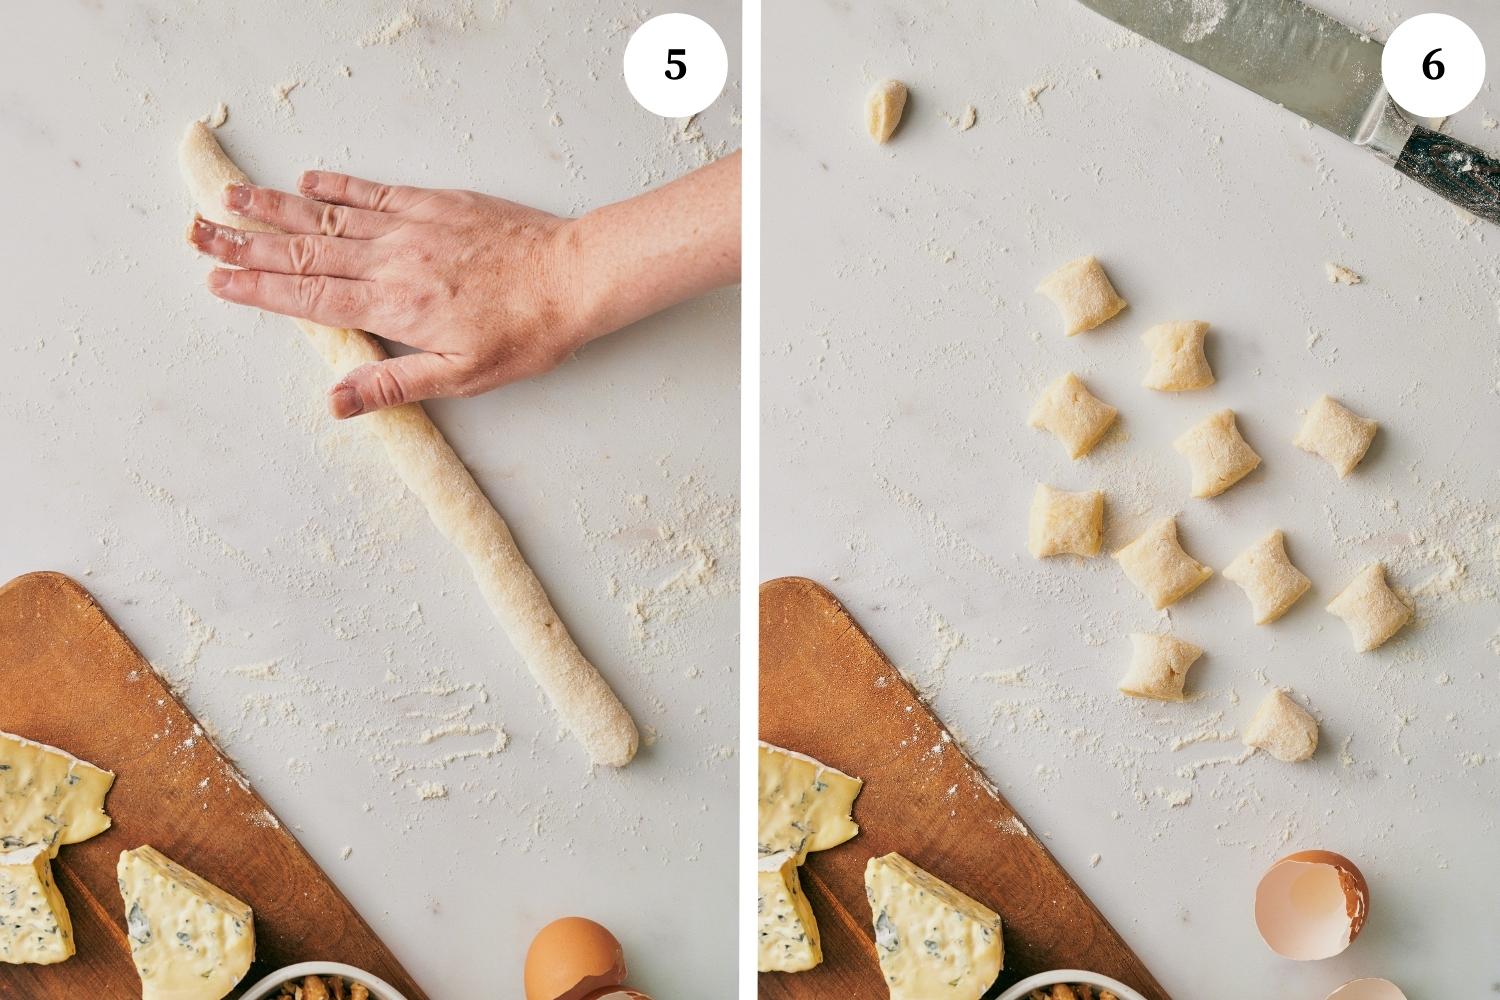 gnocchi dough rolled into a rope and cut into smaller pieces